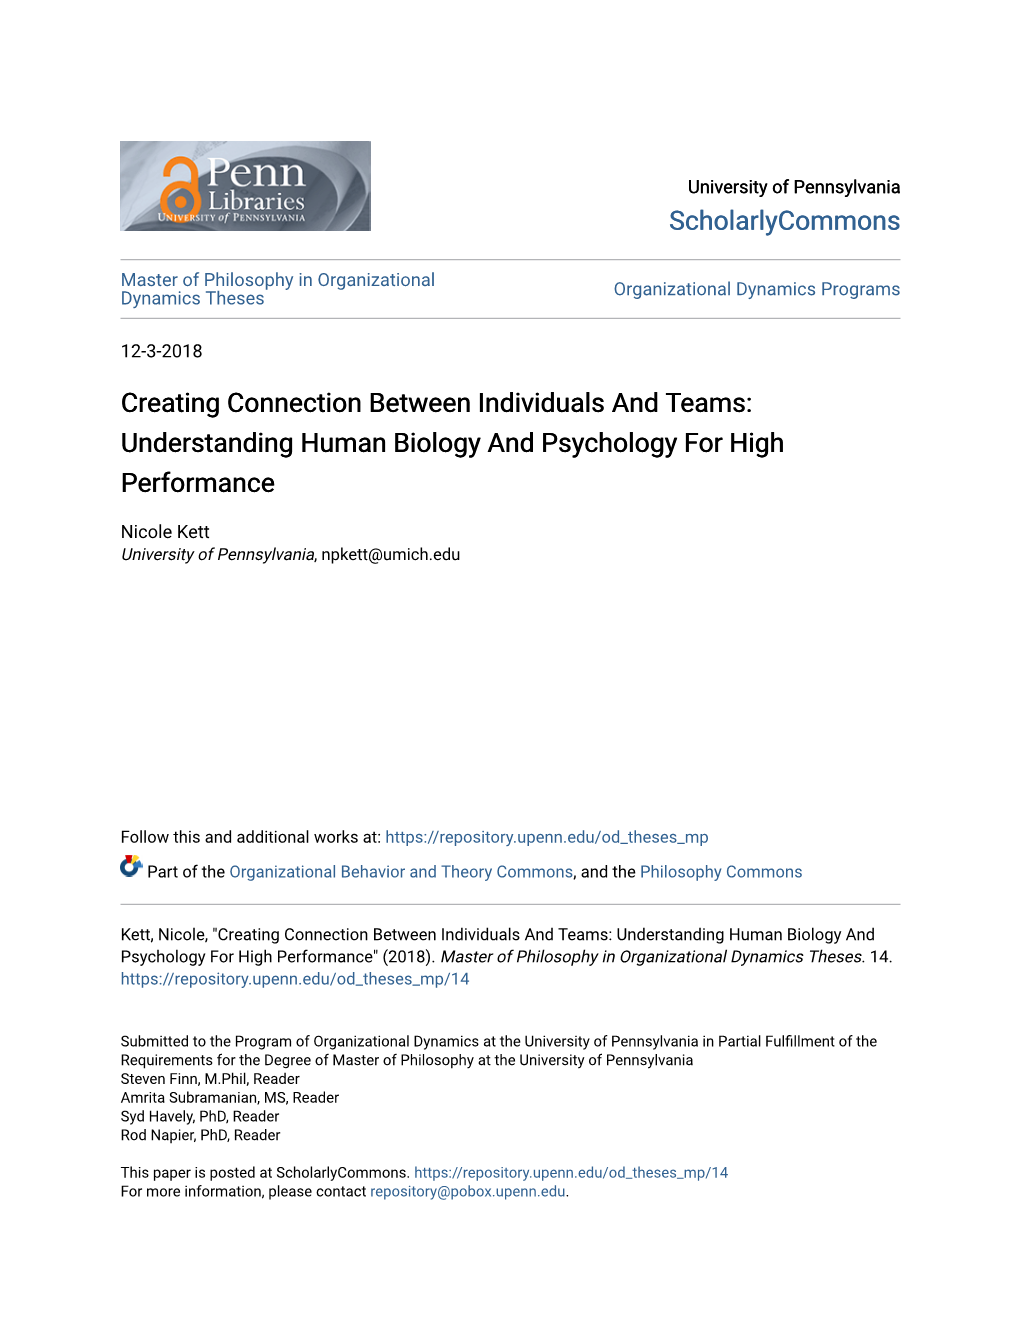 Creating Connection Between Individuals and Teams: Understanding Human Biology and Psychology for High Performance